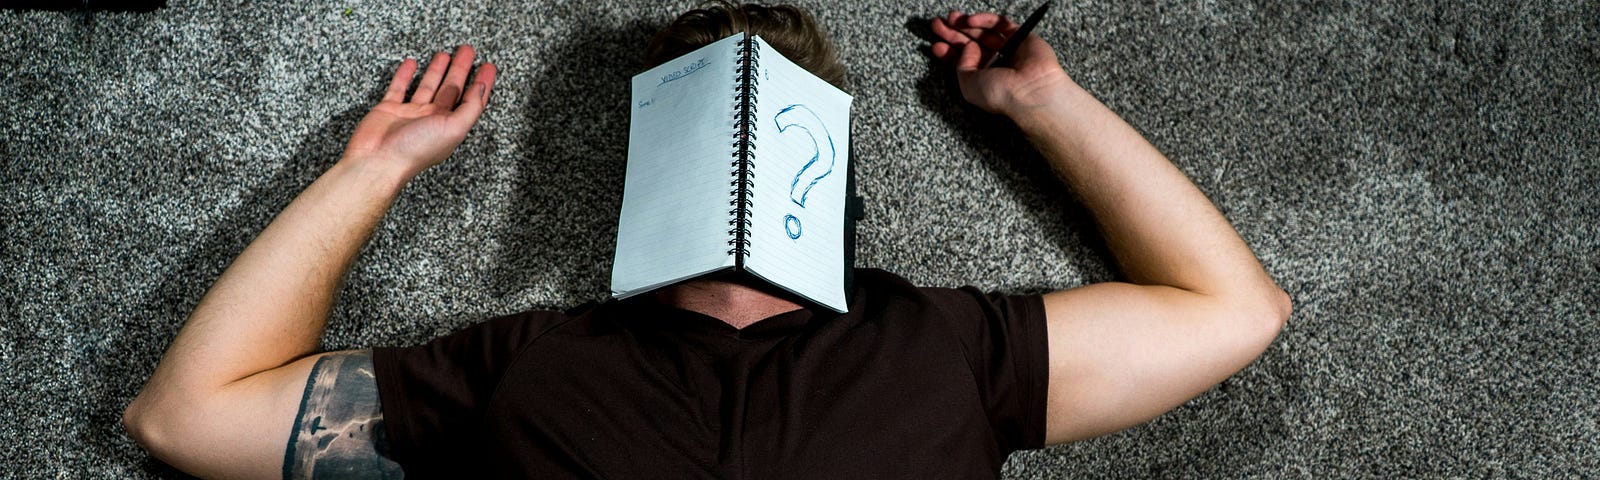 Man in black shirt and black tattoo on inner upper arm lieing on his back on a gray carpet, arms placed by his head with a notebook opened over his face and a big question mark drawn on one page.